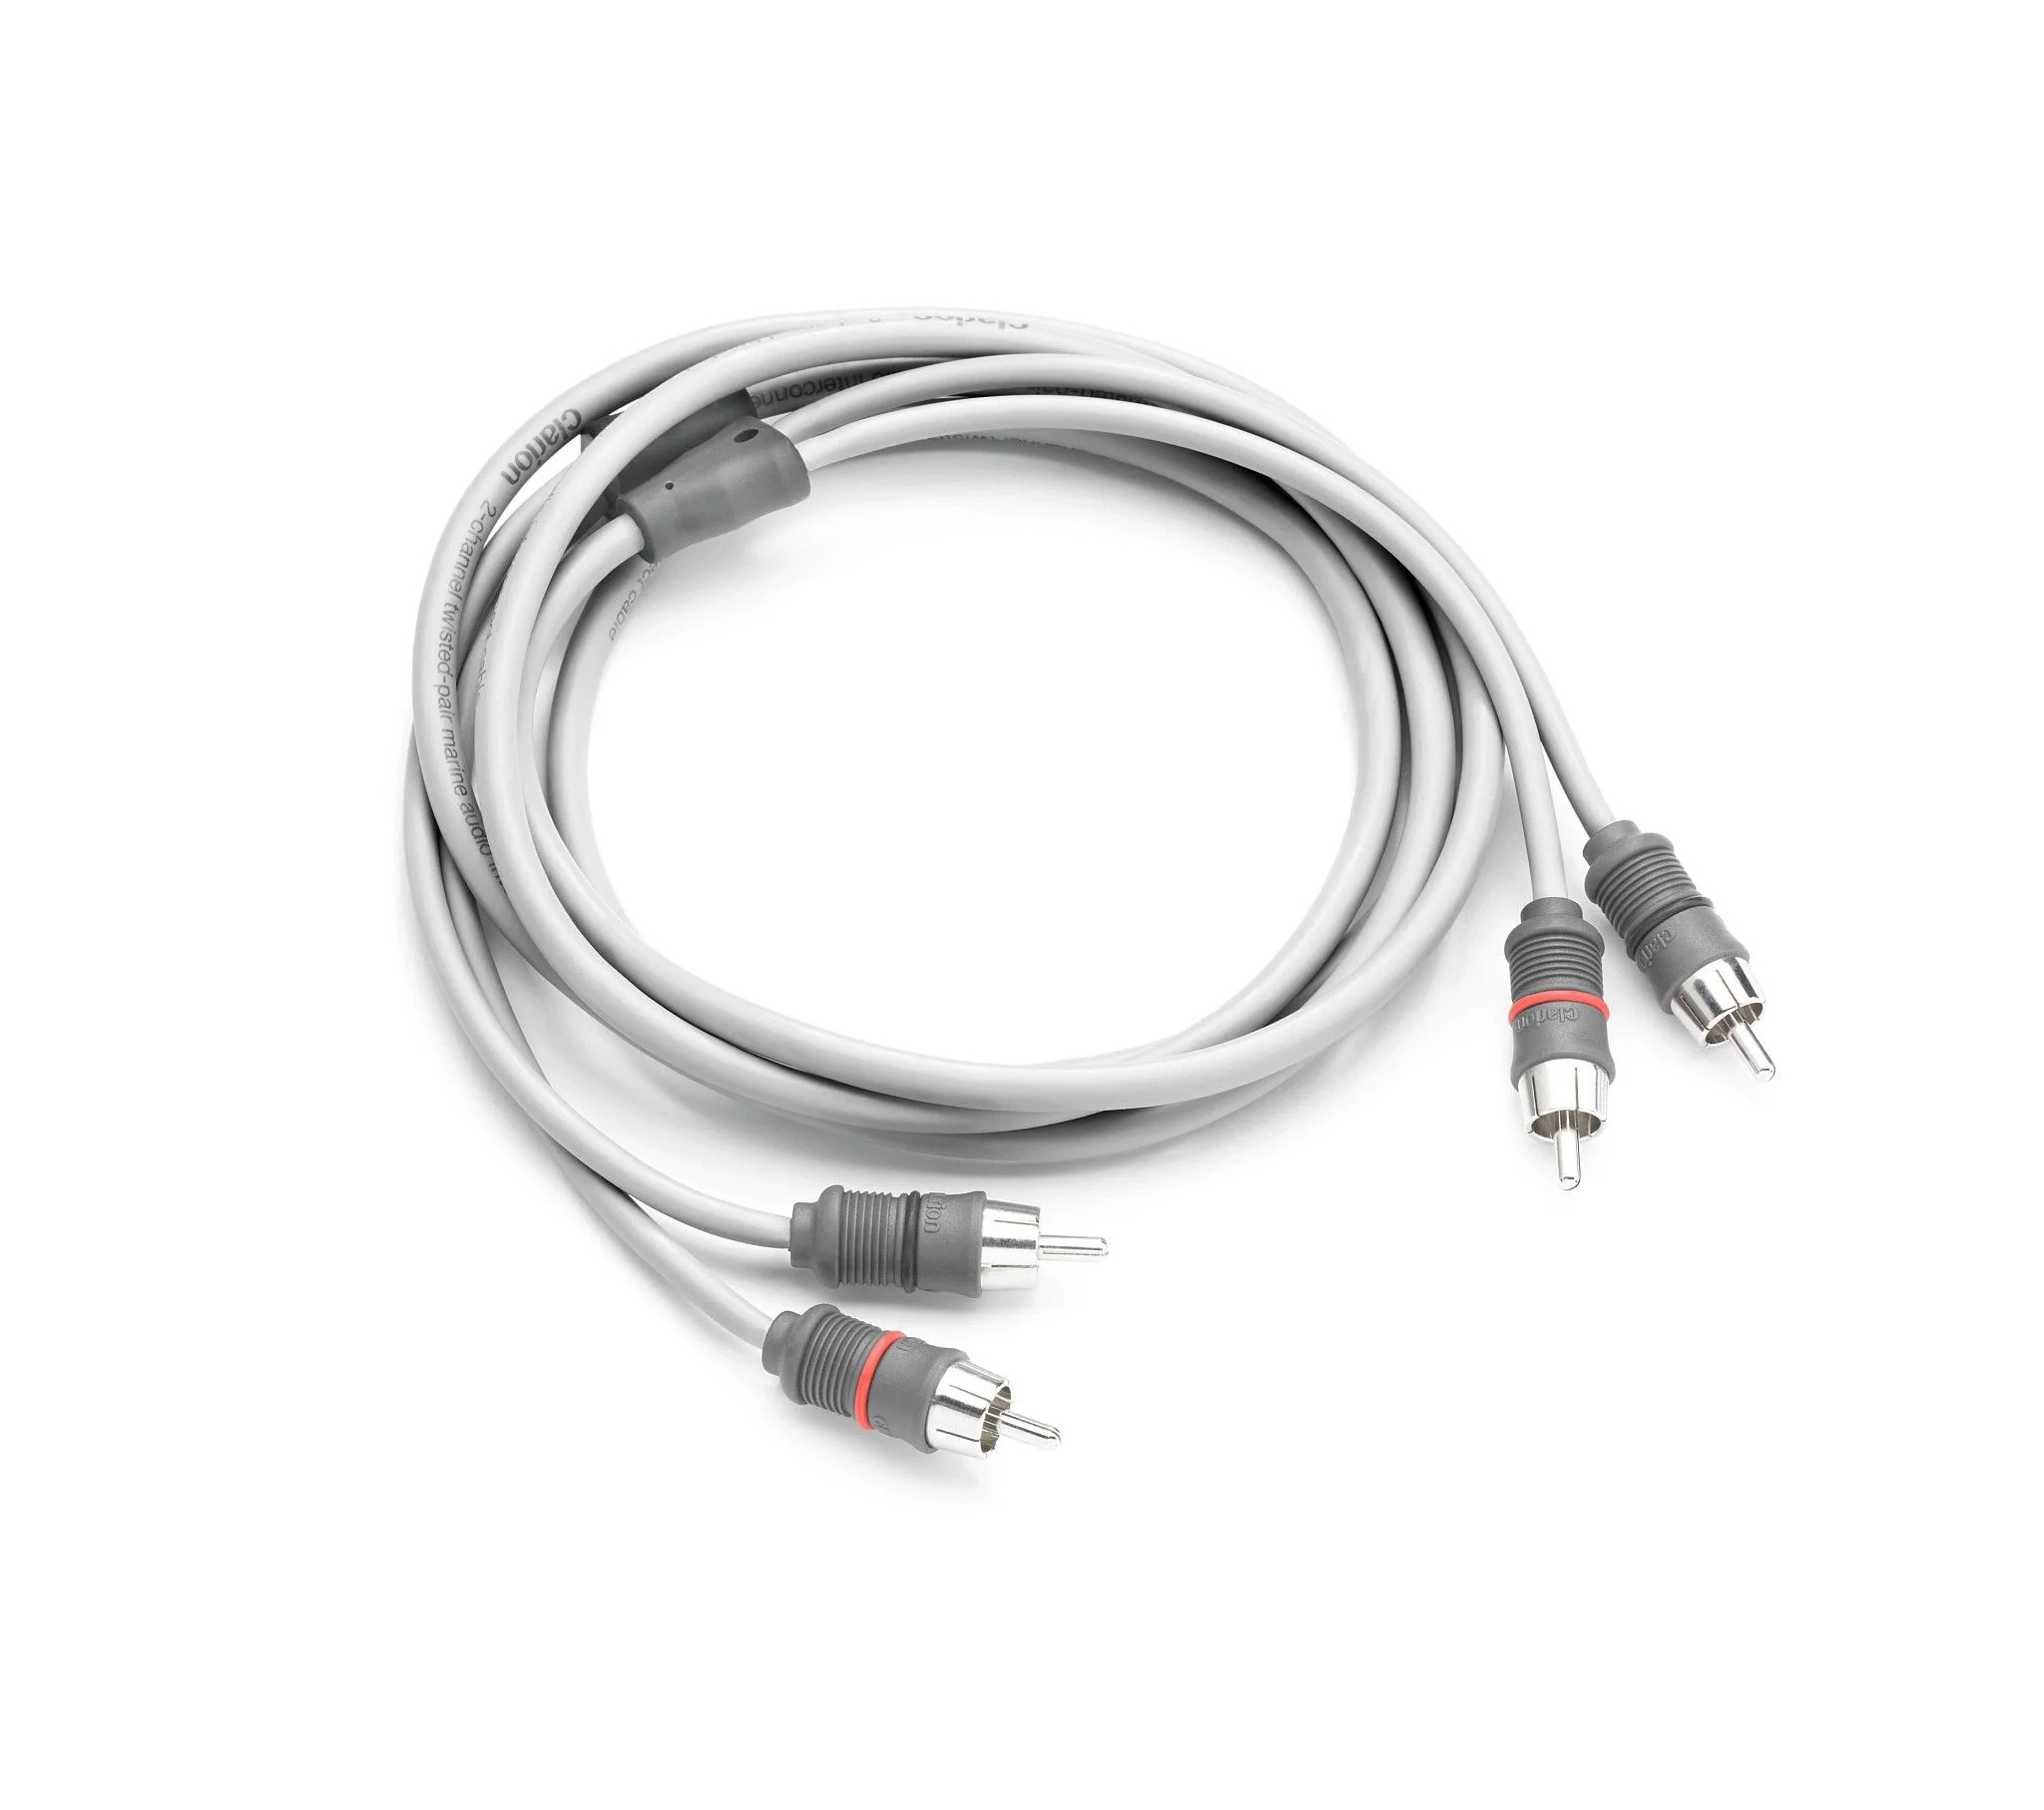 Cable audio interconnect 6ft 2 CH twisted pair RCA with brass connect connectors